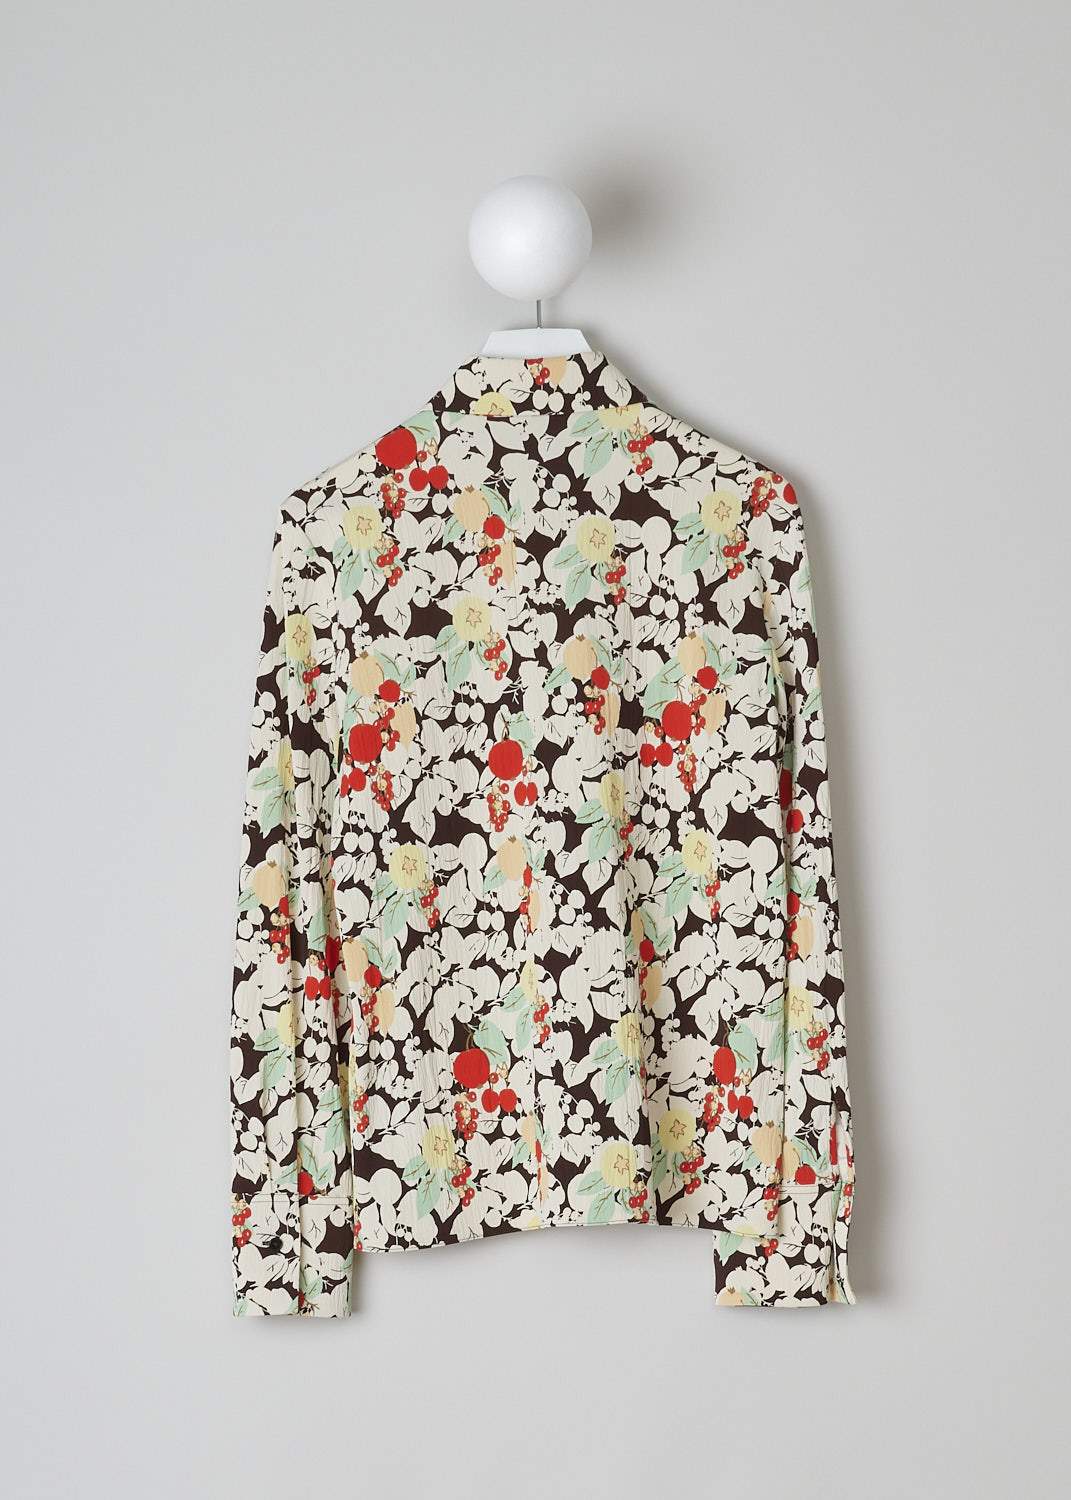 JIL SANDER, MULTICOLOR FRUIT PRINT BLOUSE, J01DL0009_J65010_972, Print, Red, Green, Back, This blouse has a multicolor fruit print. The blouse has a spread collar and a front button closure. The long sleeves have buttoned cuffs. The blouse has a straight hemline.
